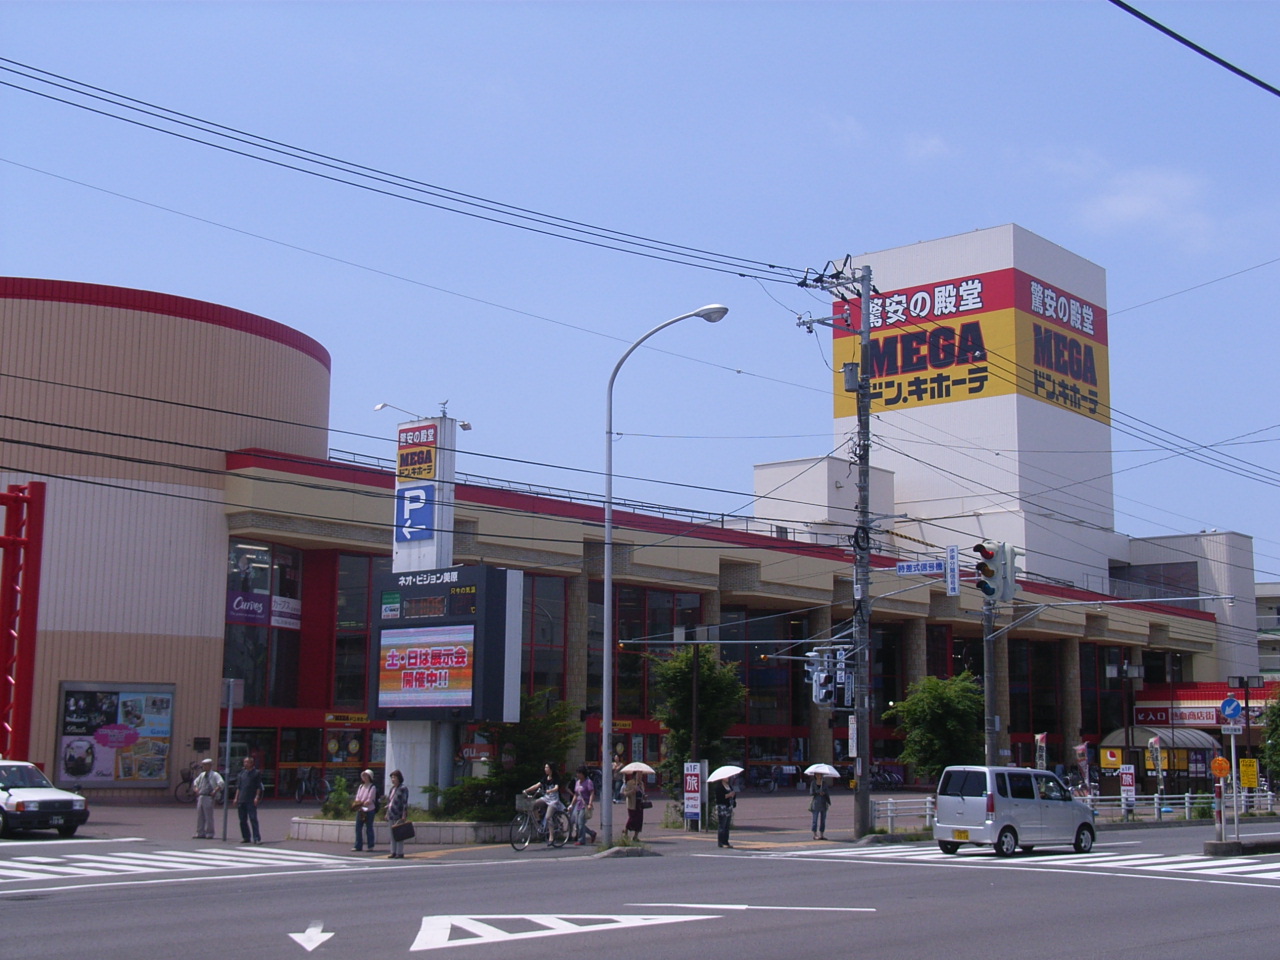 Shopping centre. MEGA Don ・ 688m until Quijote Hakodate store (shopping center)